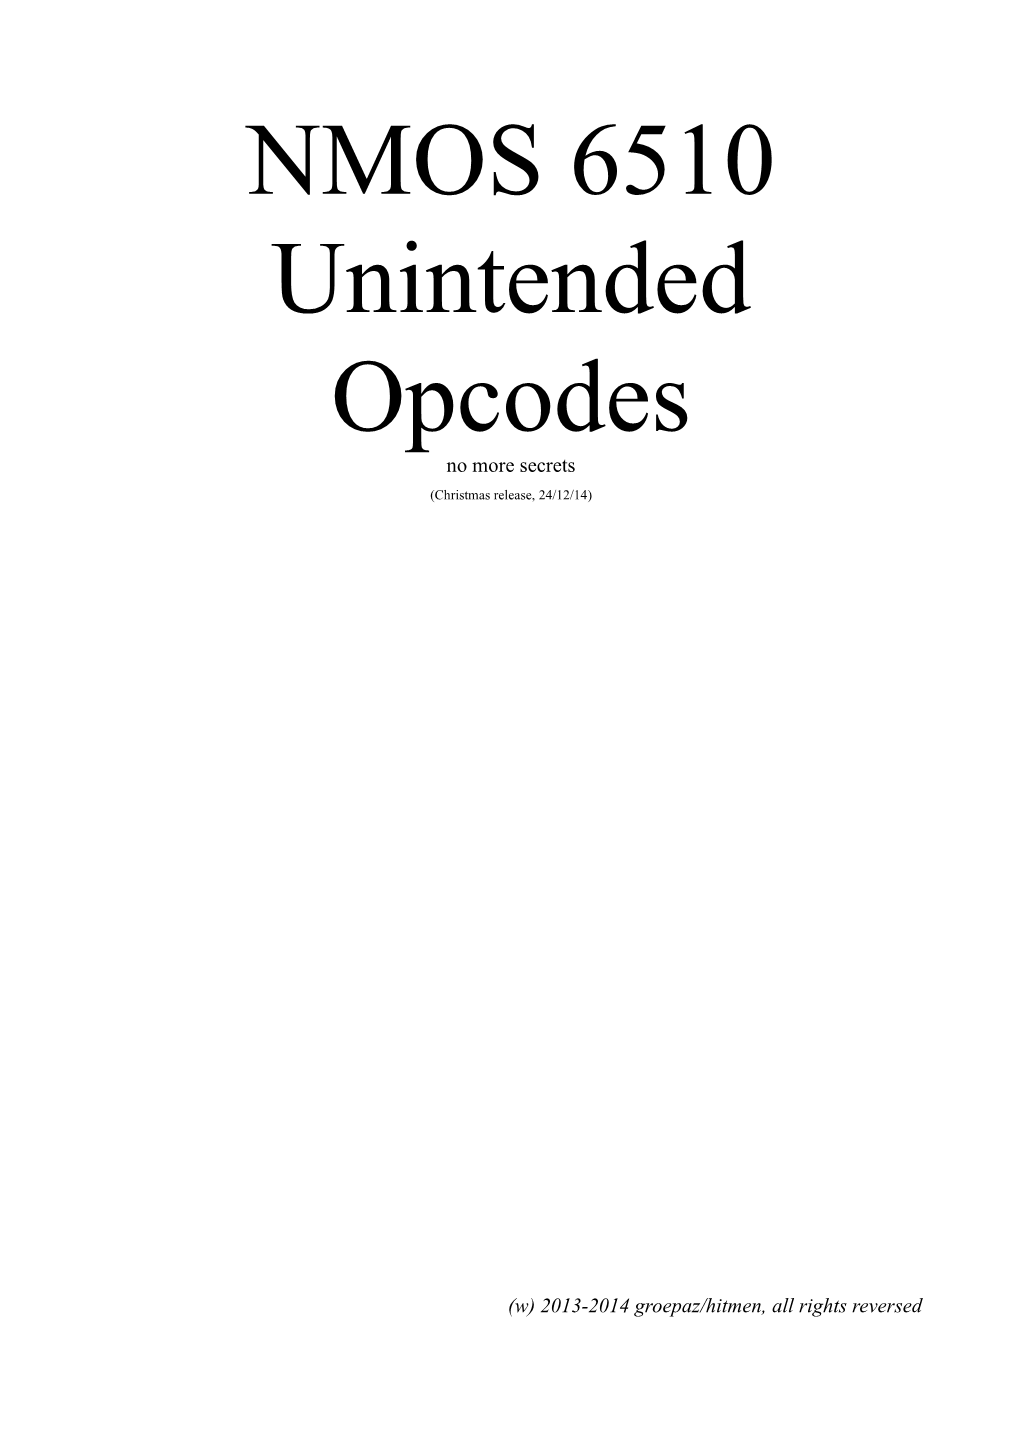 NMOS 6510 Unintended Opcodes No More Secrets (Christmas Release, 24/12/14)